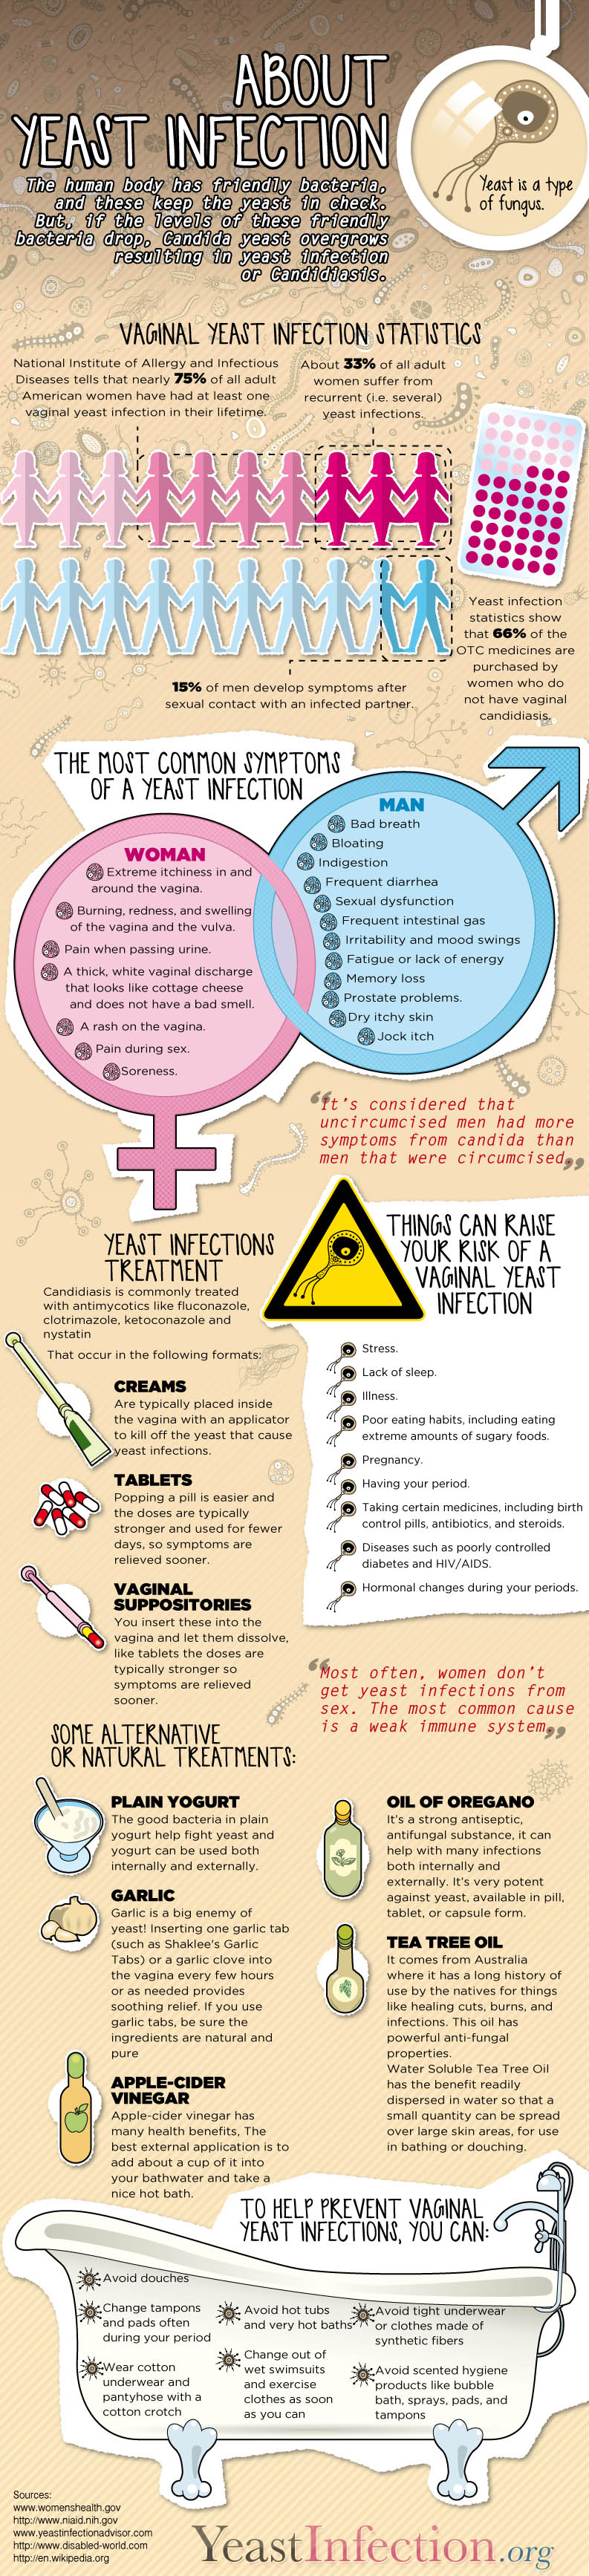 Visual Look at Yeast Infection - YeastInfection.Org by ...